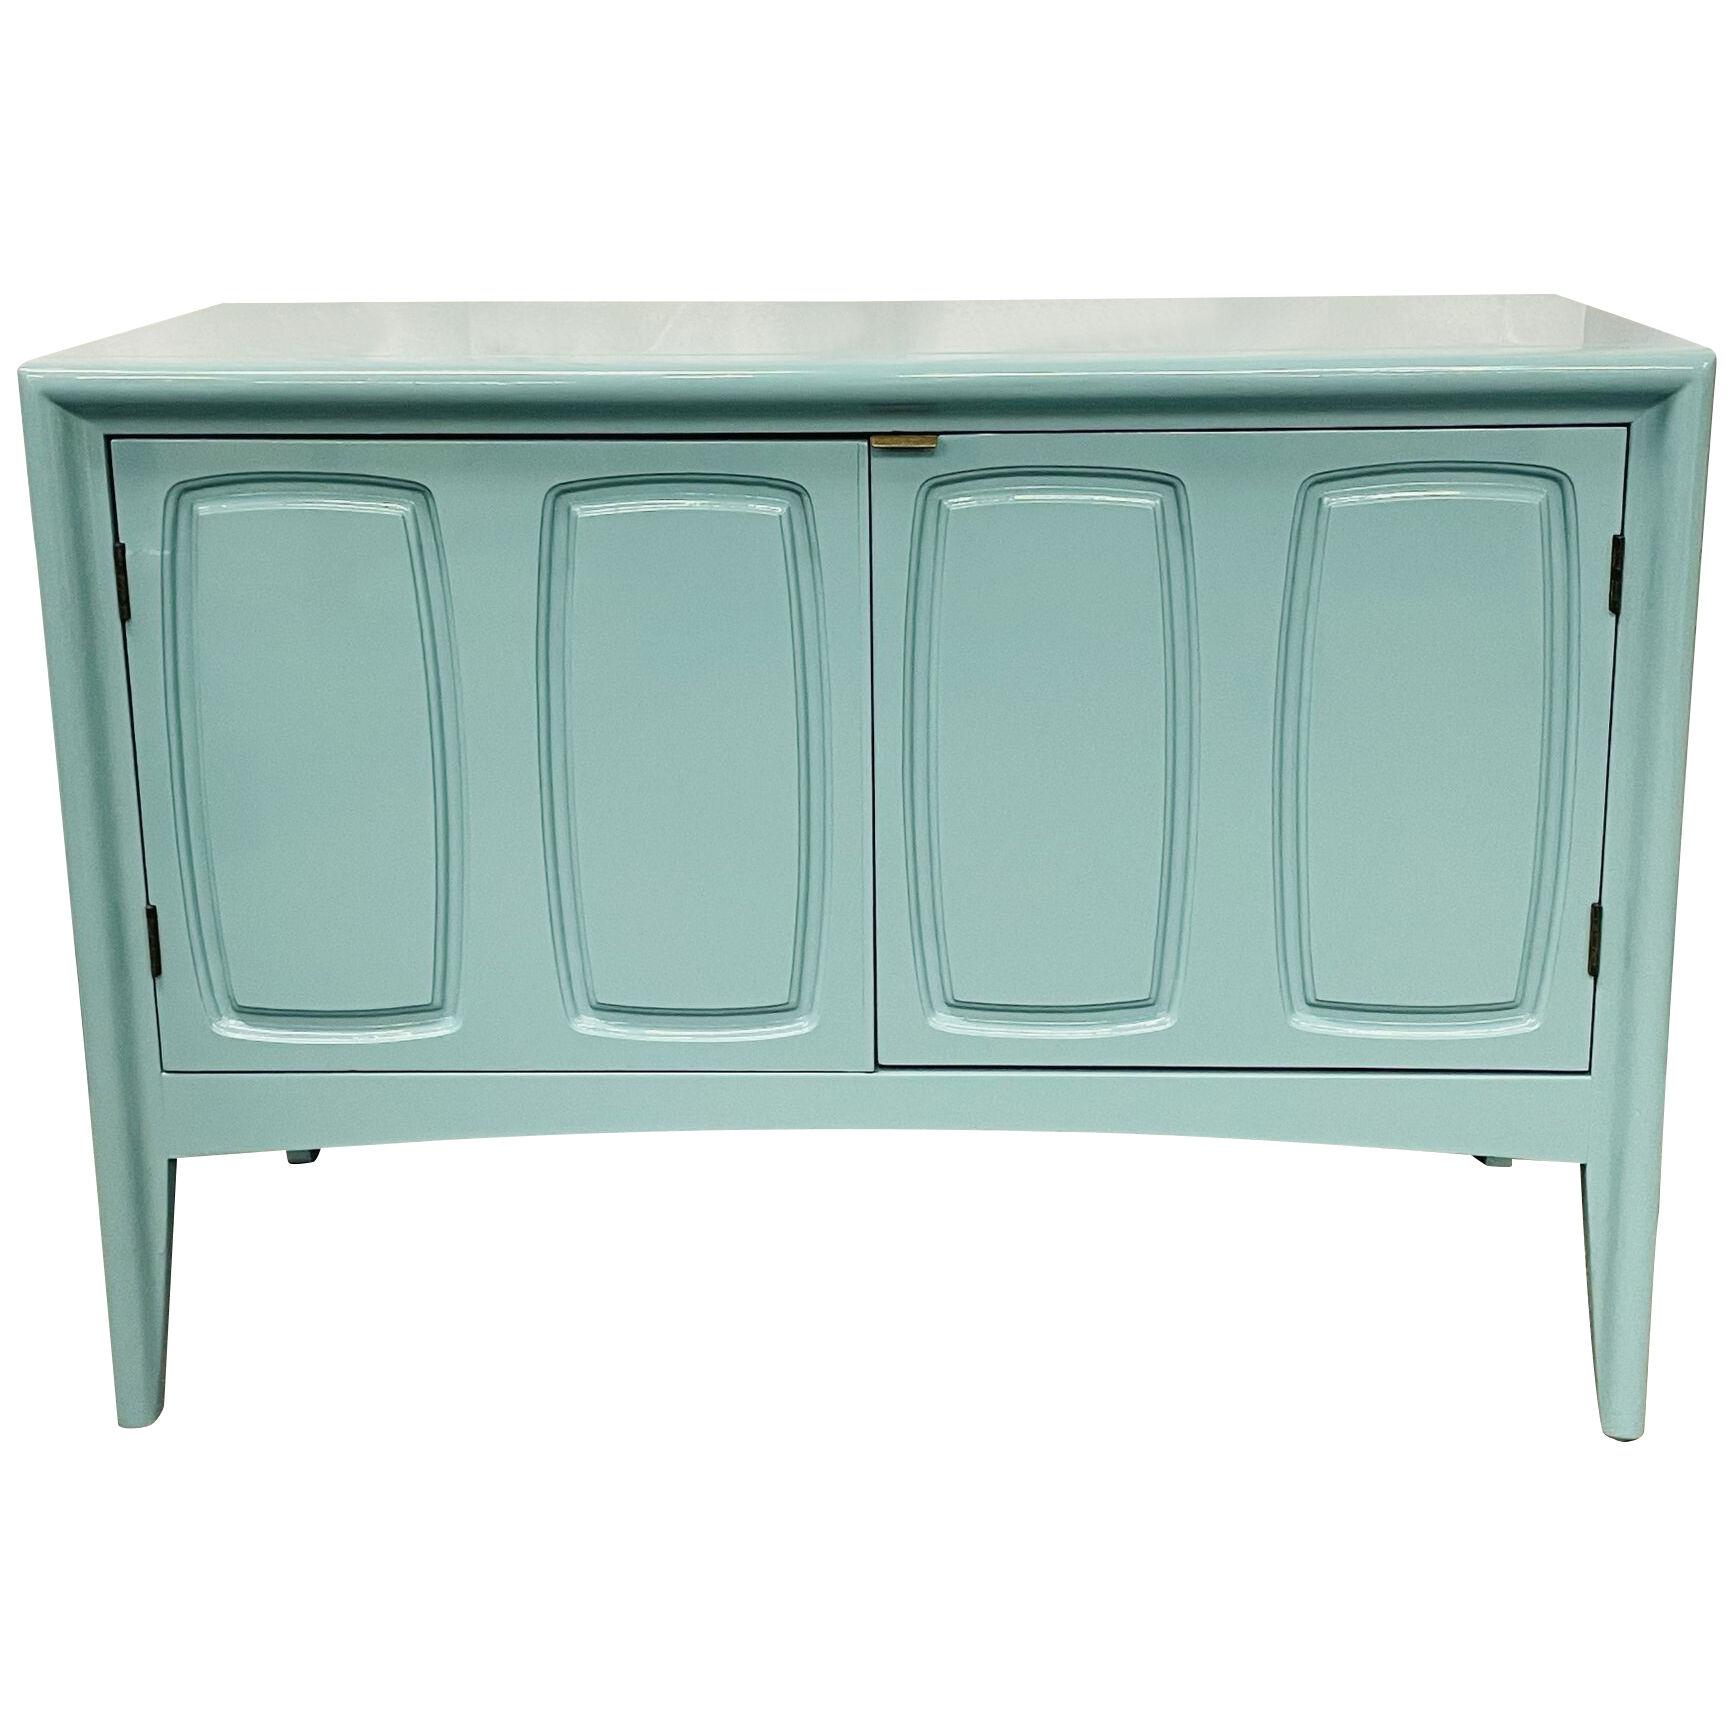 A Mid Century Modern Chest, Nightstand or Table, Robins Egg Blue